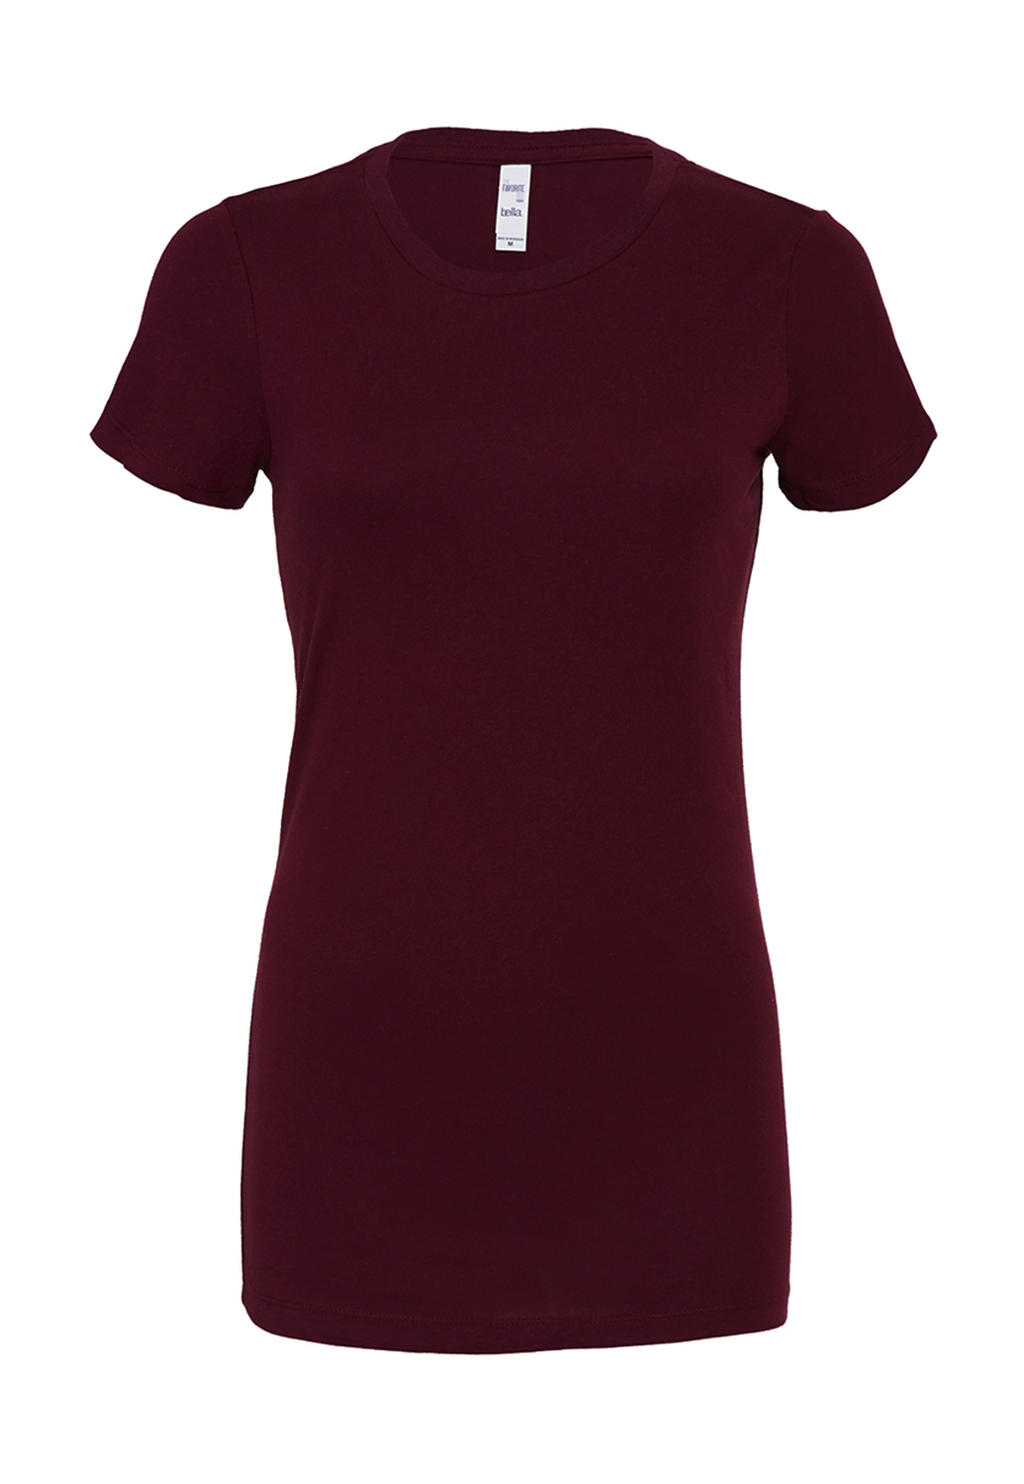  The Favorite T-Shirt in Farbe Maroon